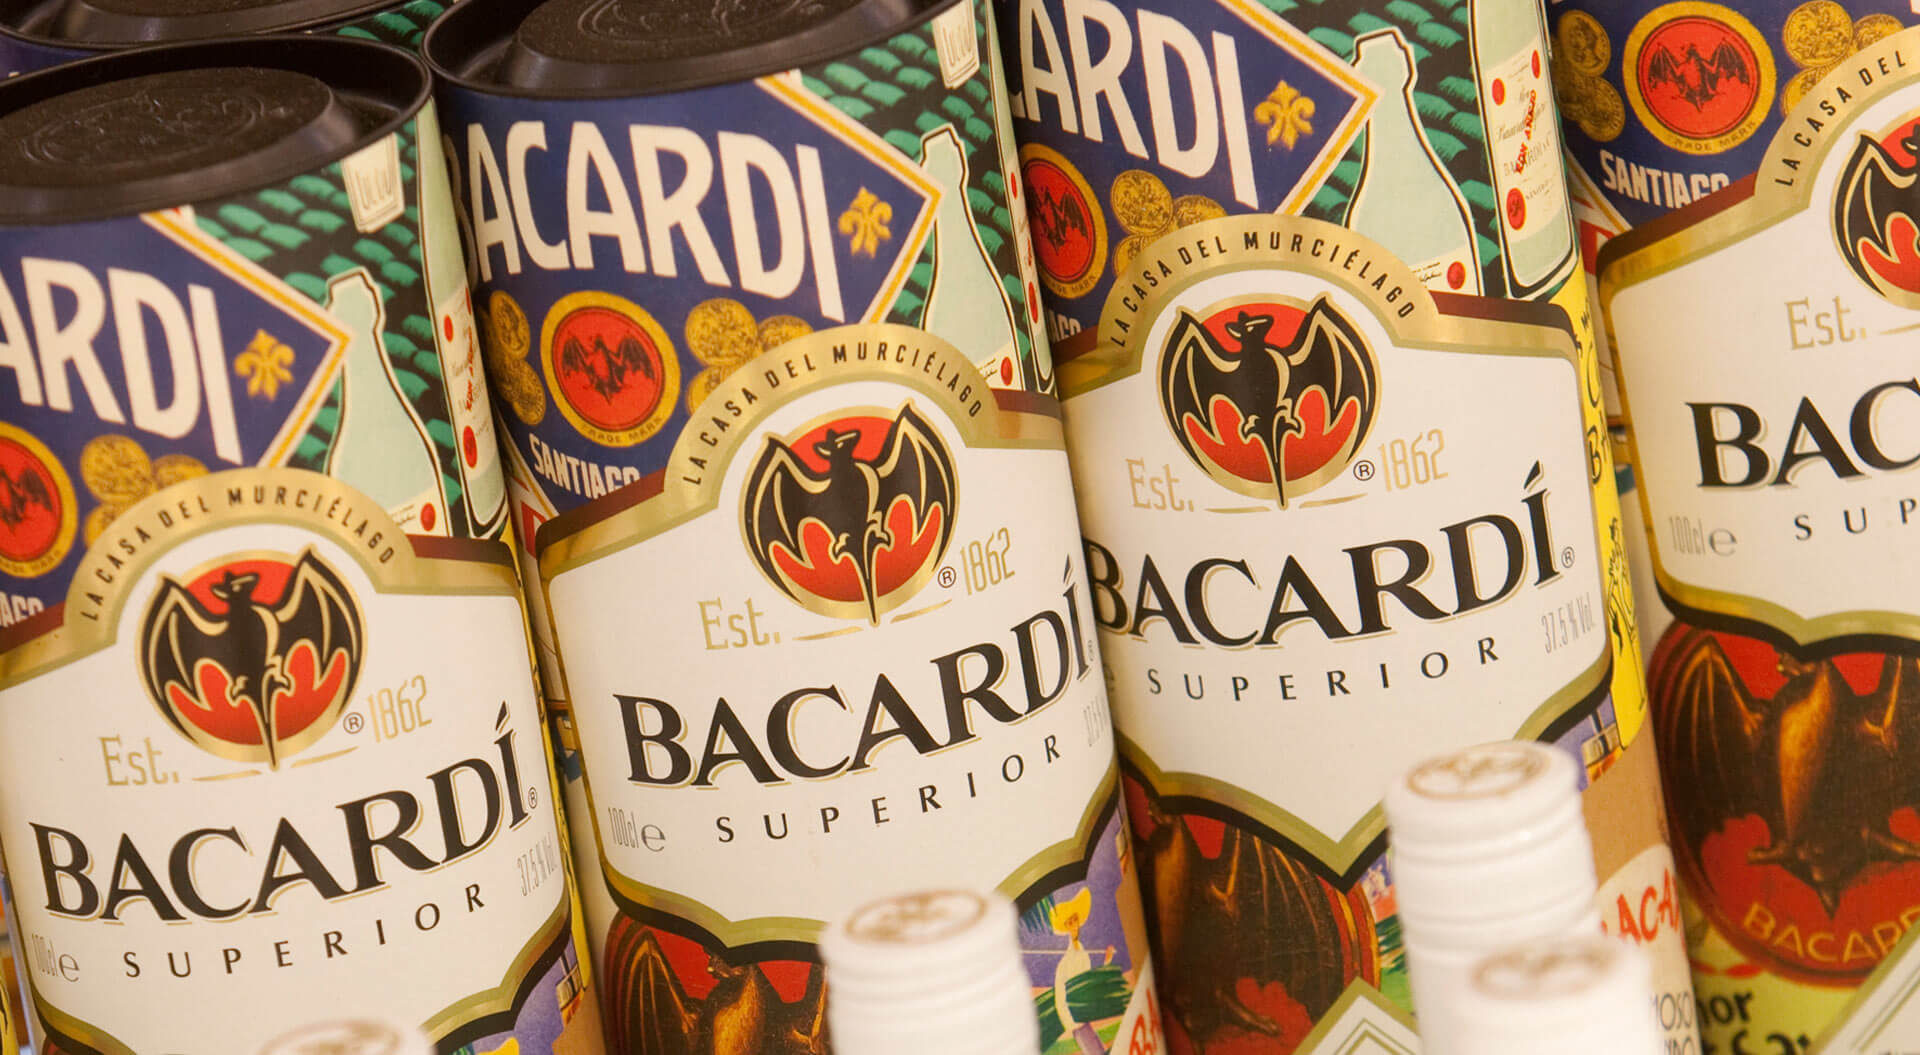 Bacardi 150 Years celebration product packaging design